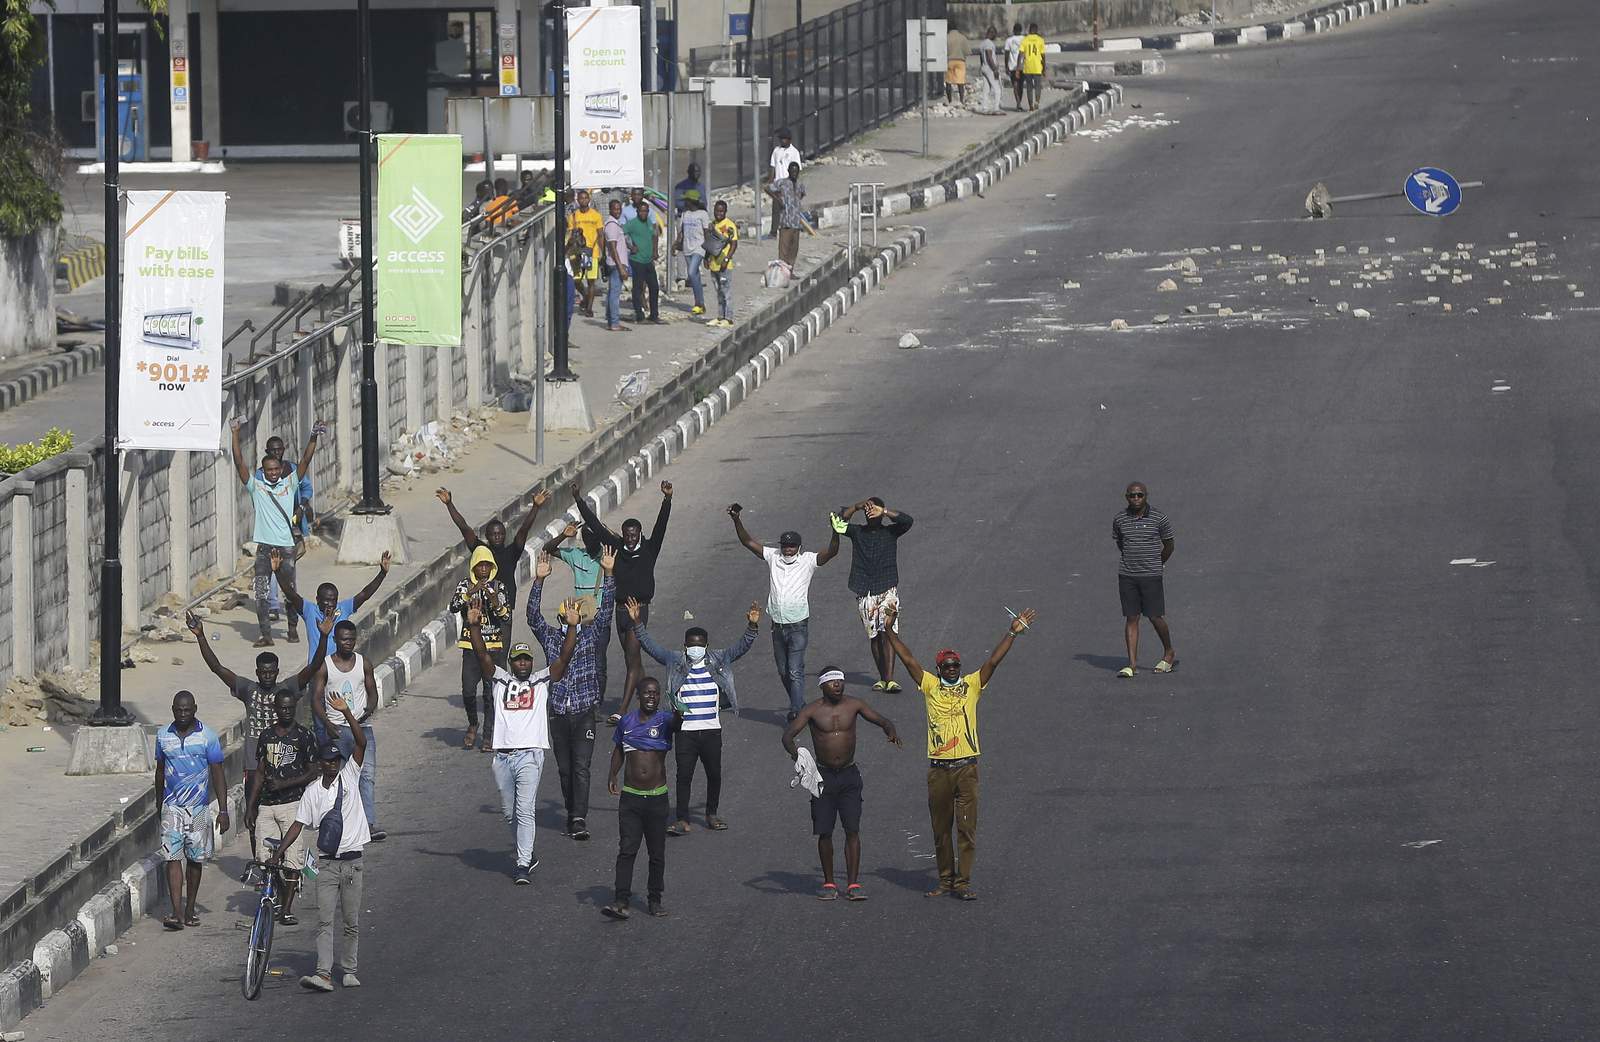 Nigerian forces killed 12 peaceful protesters, Amnesty says